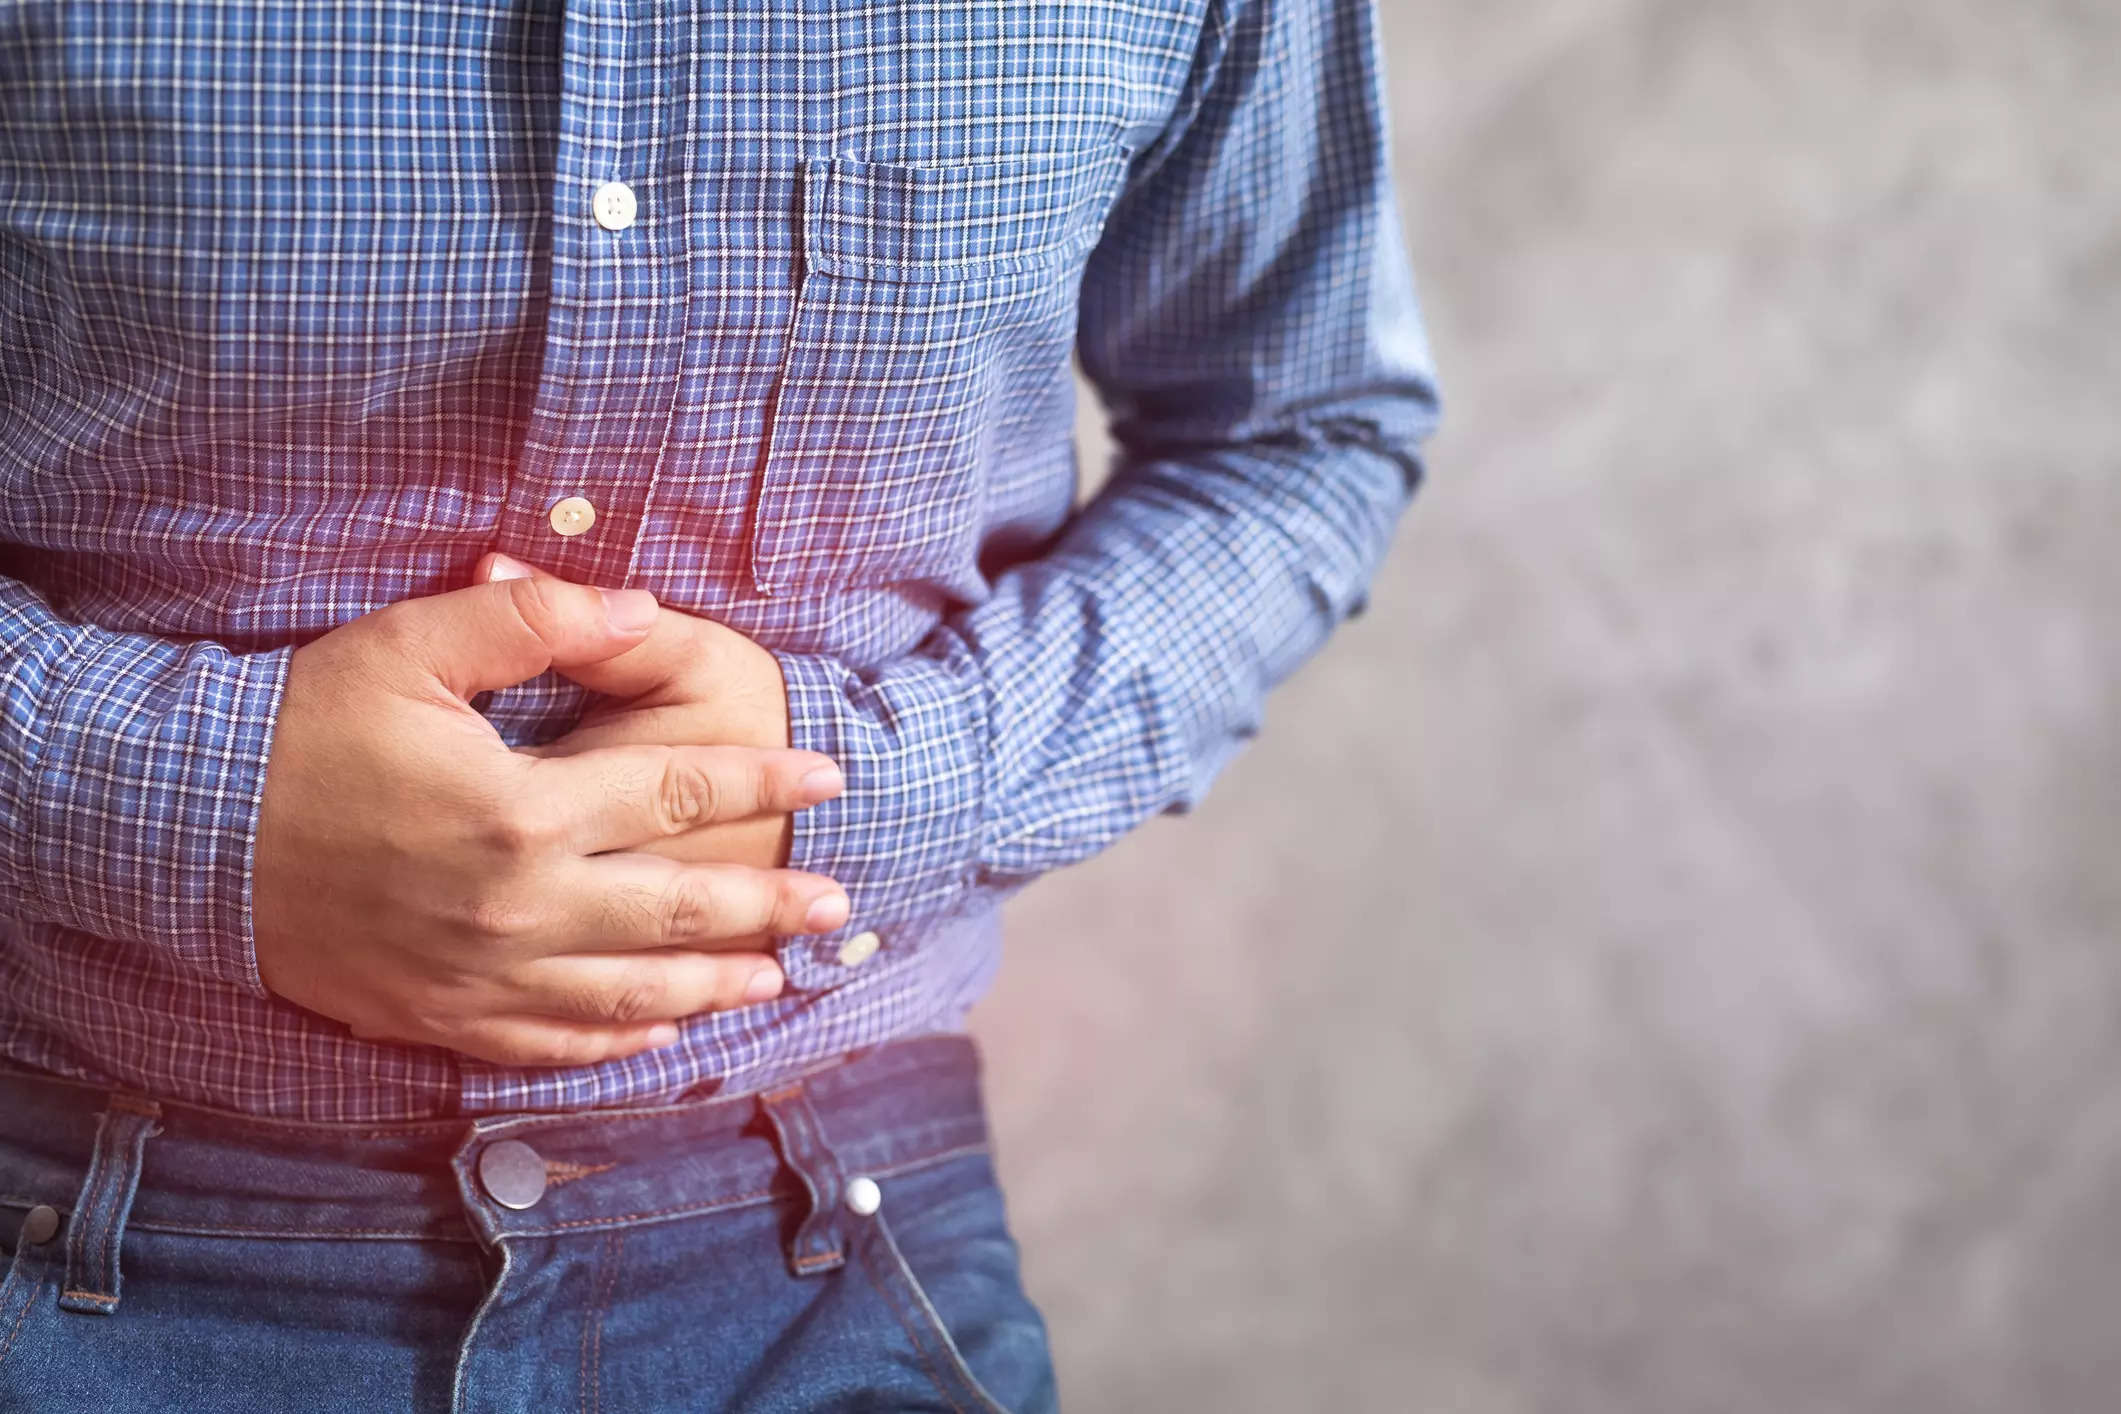 Although doctors say that farting throughout the day and night is a natural and largely healthy thing. However, if the build-up of gas becomes chronic, it can result in uncomfortable bloating. It could help to focus on the frequency and smell to look for clues and tip offs regarding overall health.